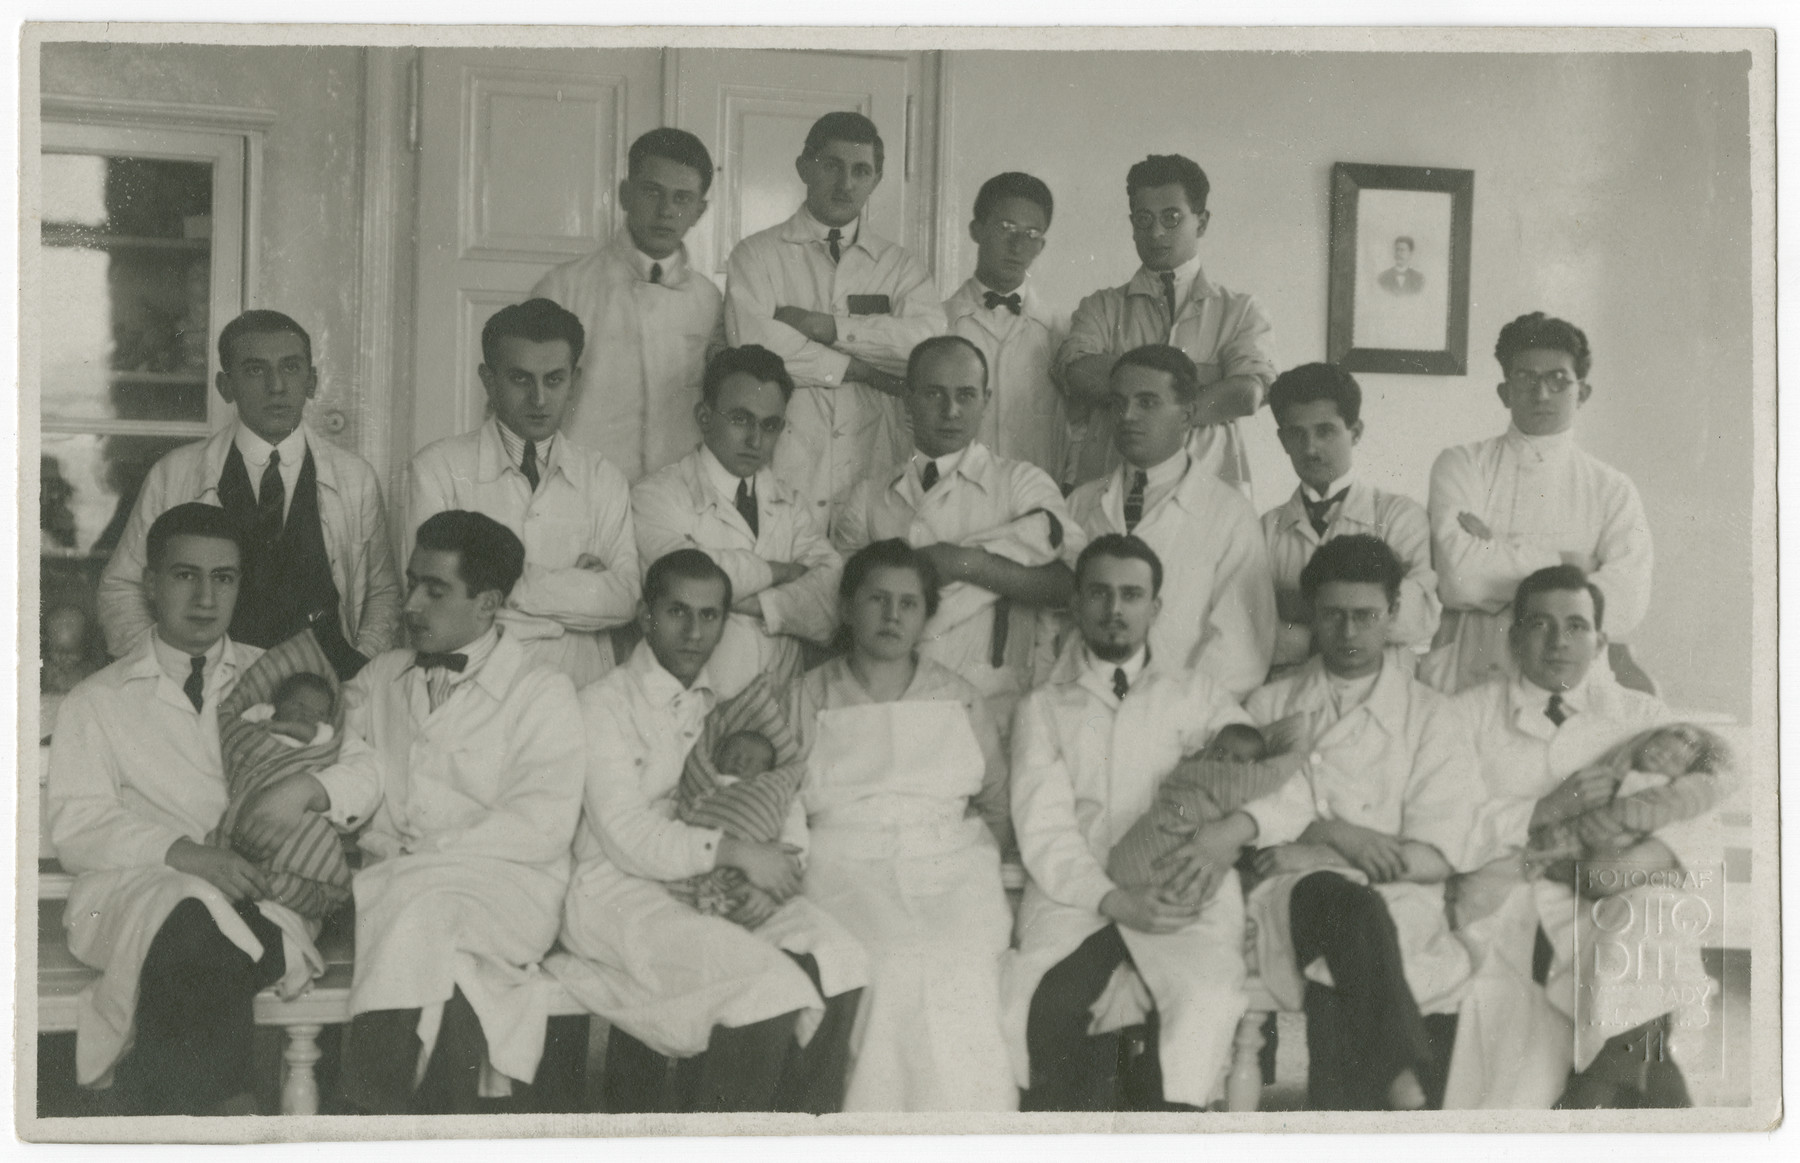 Group portrait of the Department of Obstetrics and Gynecology at Charles University in Prague.  Some of the physicians are holding recently delivered babies.

Dr. Kurt Grunwald is seated on the bottom left.